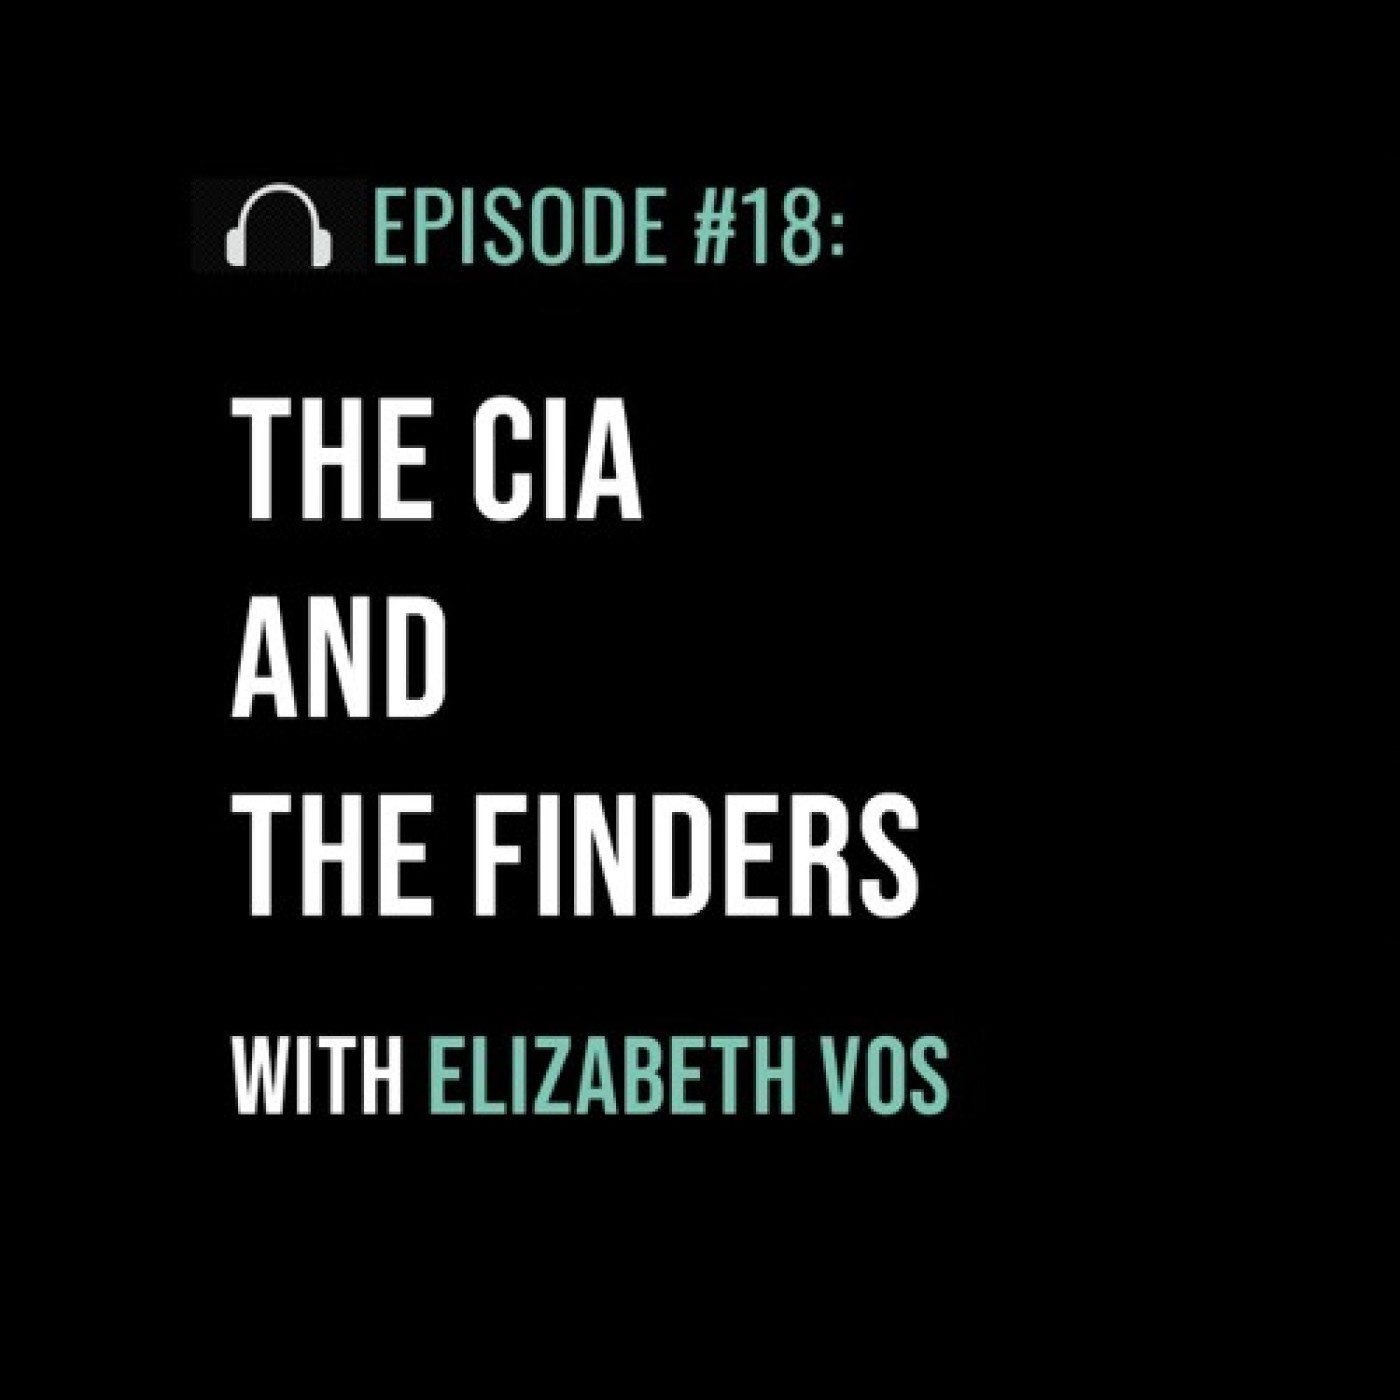 The CIA and The Finders with Elizabeth Vos